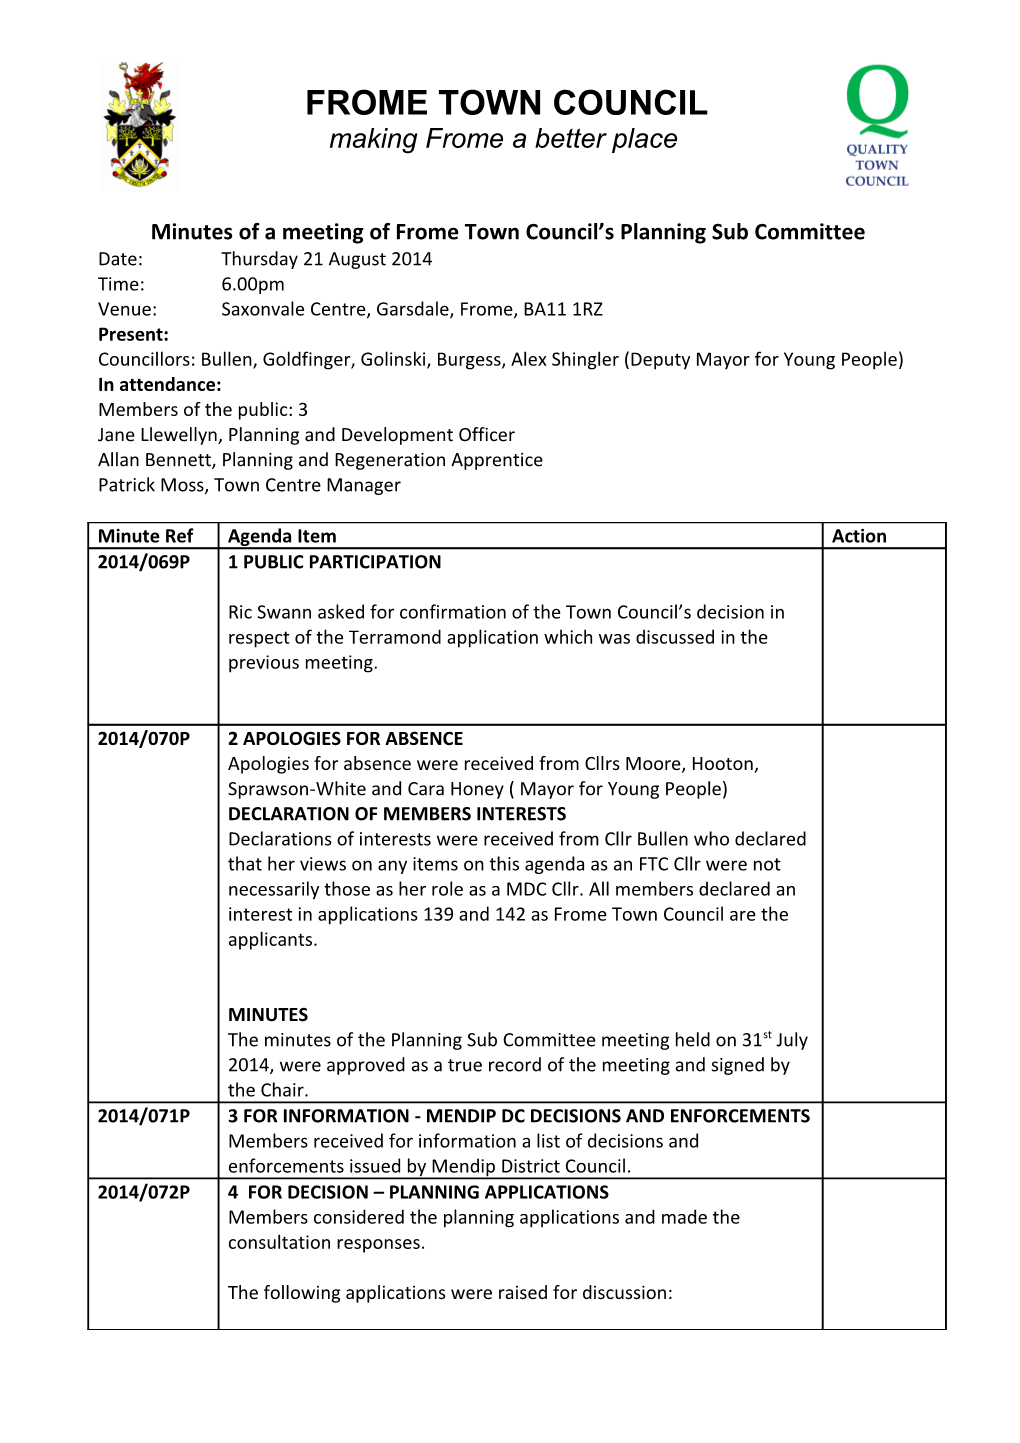 Minutes of a Meeting of Frome Town Council S Planning Sub Committee